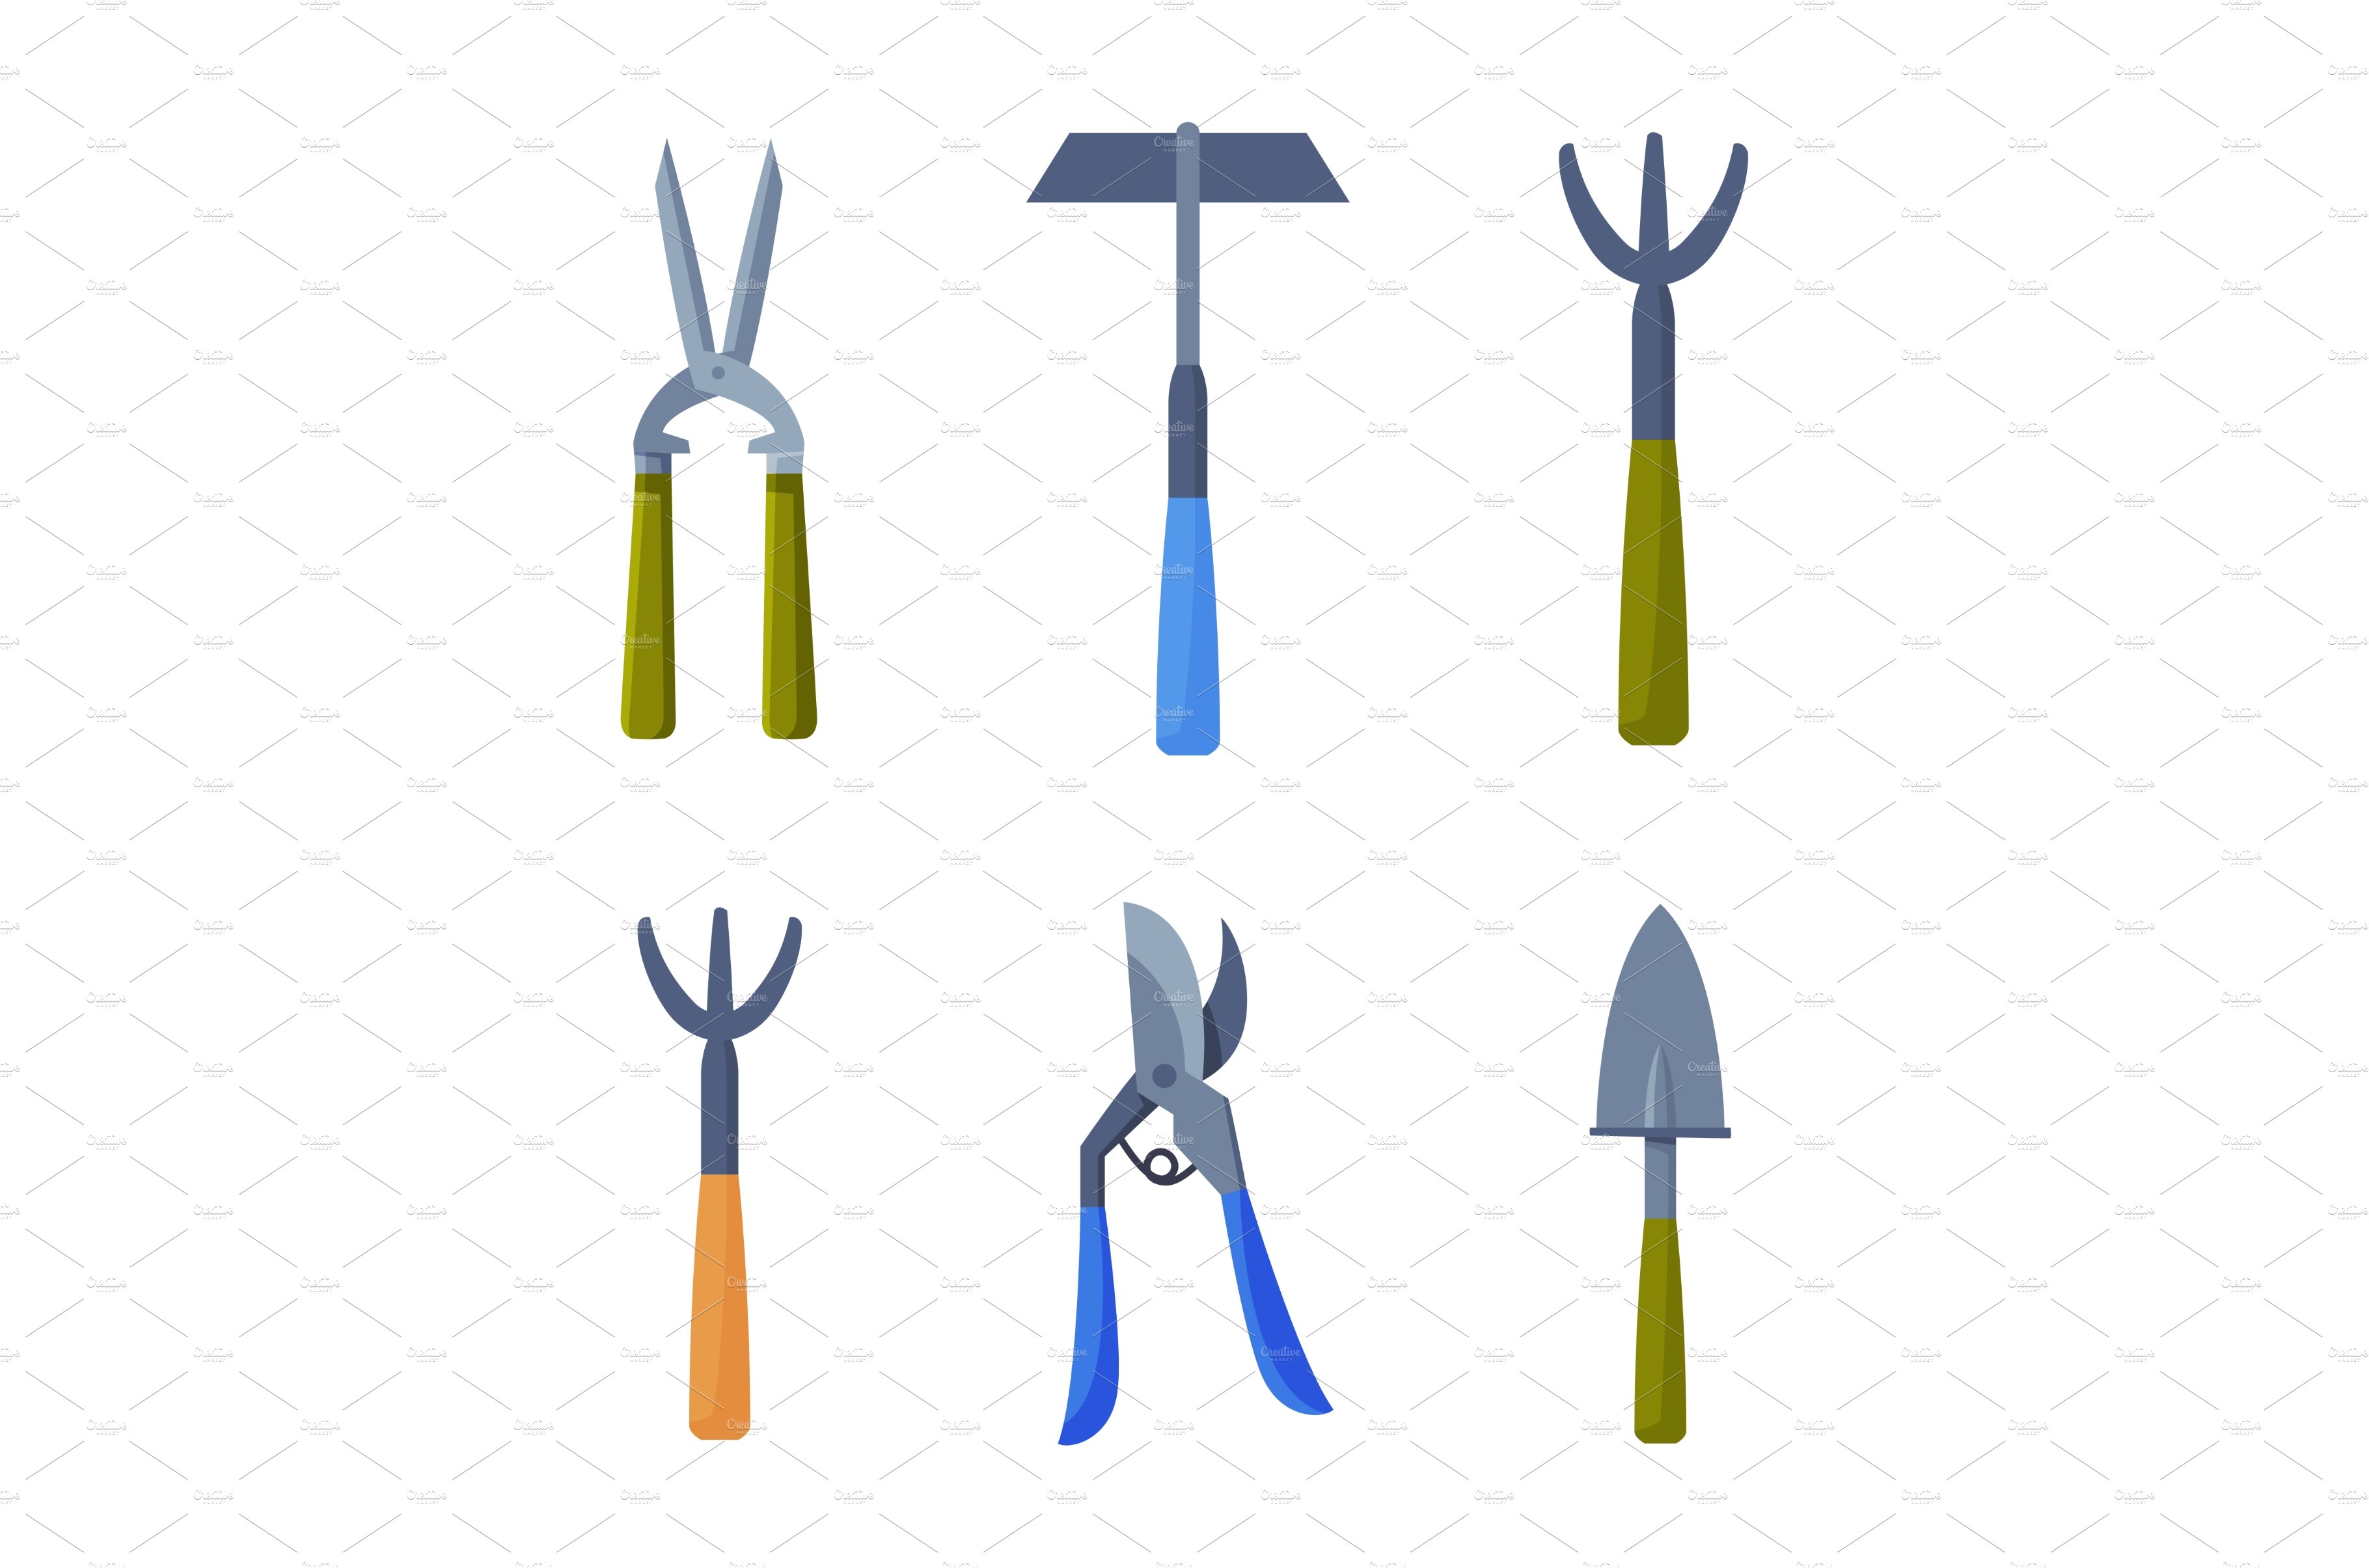 Garden Tools with Bush Pruner cover image.